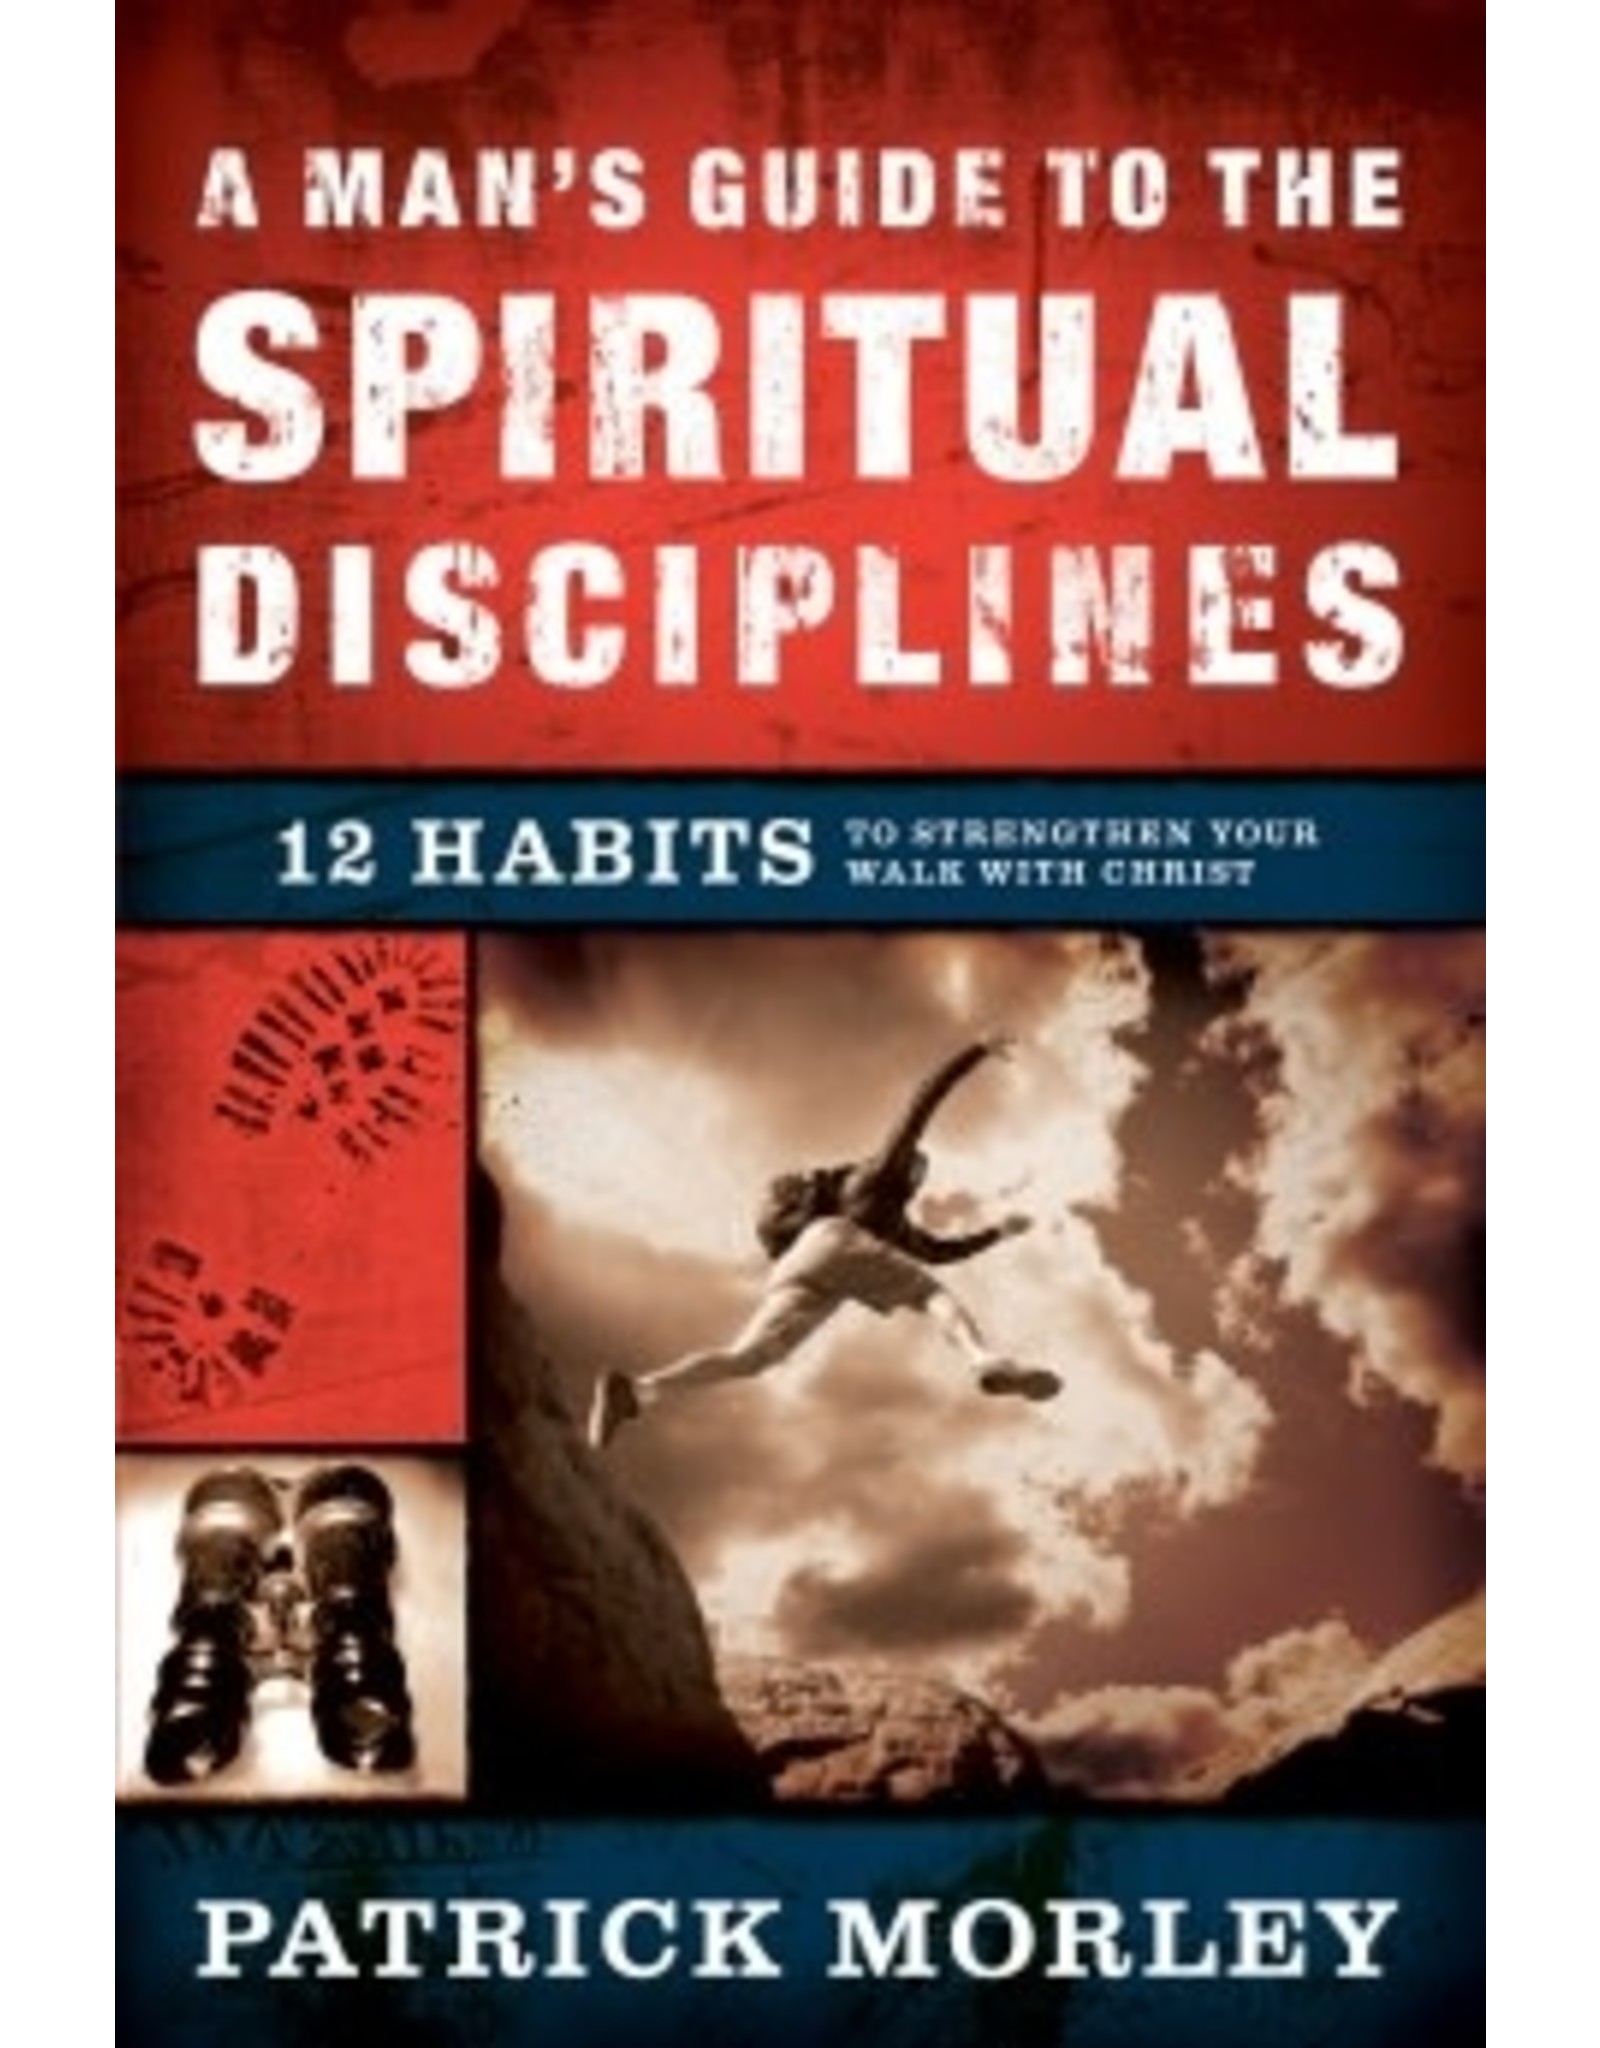 Morley A Man's Guide To The Spiritual Disciplines